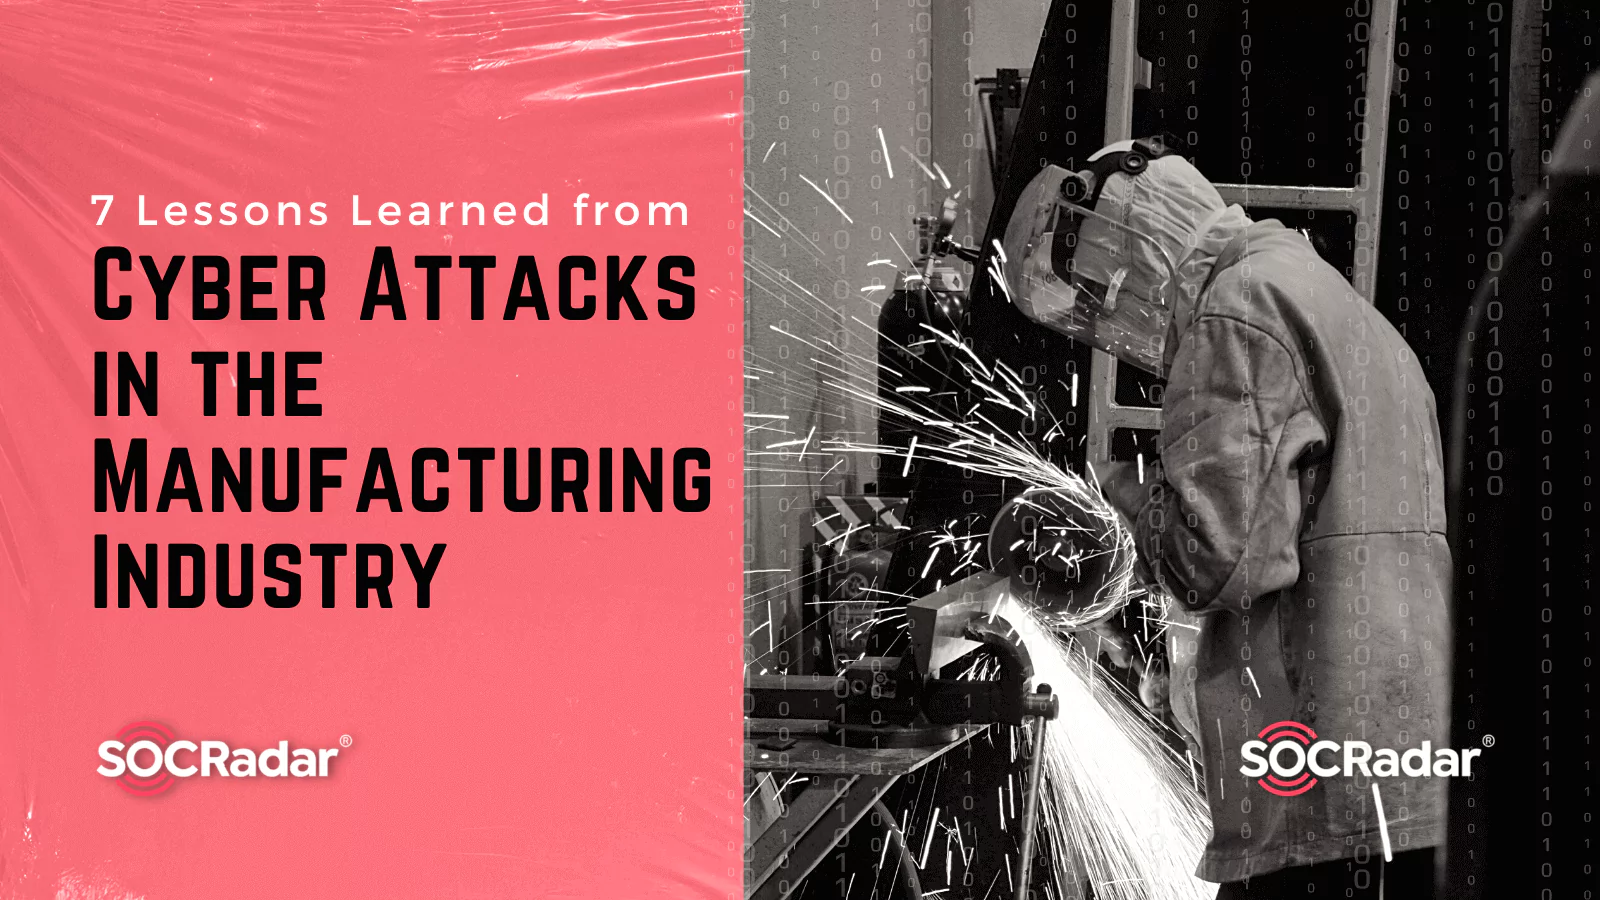 SOCRadar® Cyber Intelligence Inc. | 7 Lessons Learned from Cyber Attacks in the Manufacturing Industry